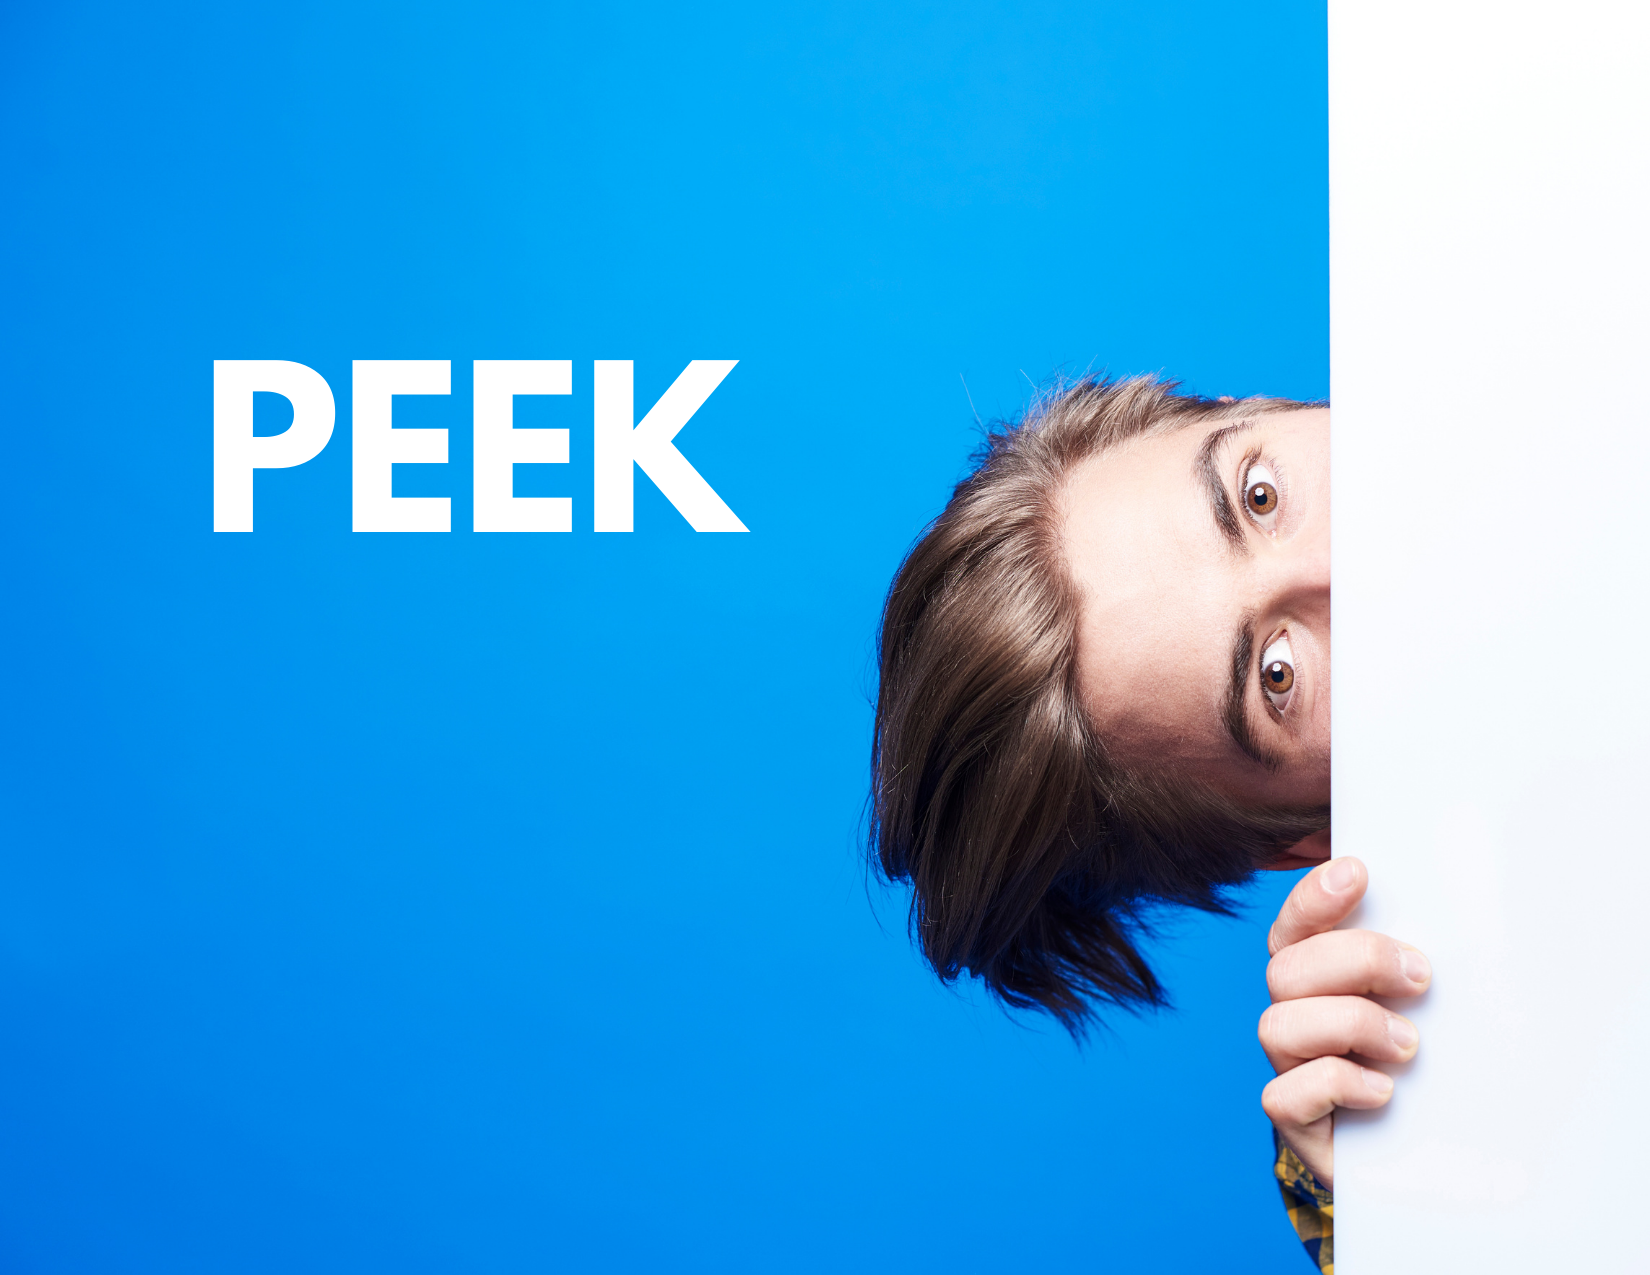 A picture of a man peeking from behind a wall with the caption "Peek"